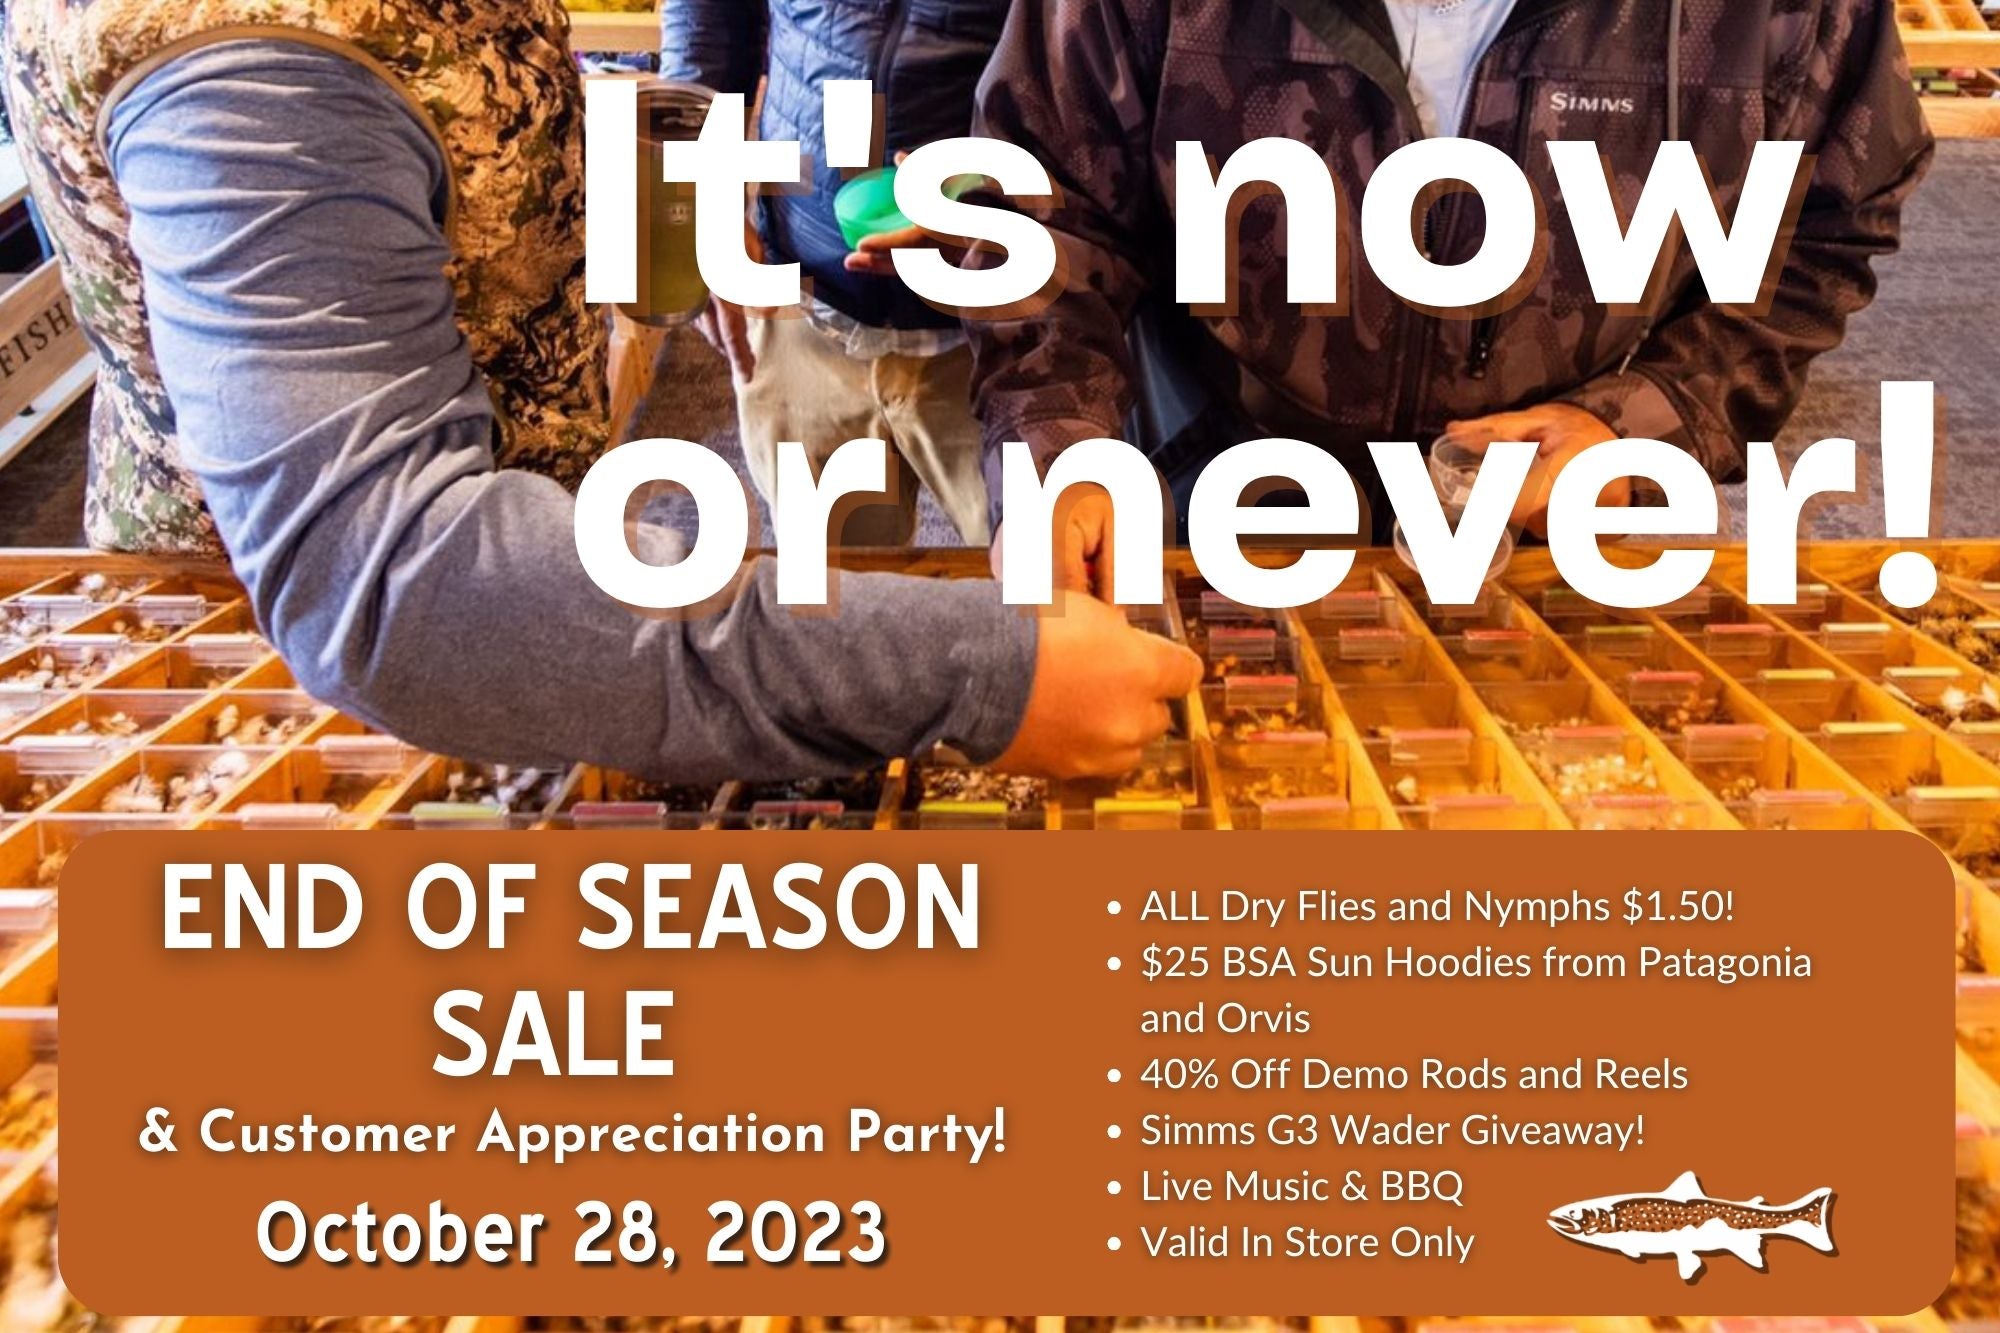 End of Season Sale Event - October 28, 2023